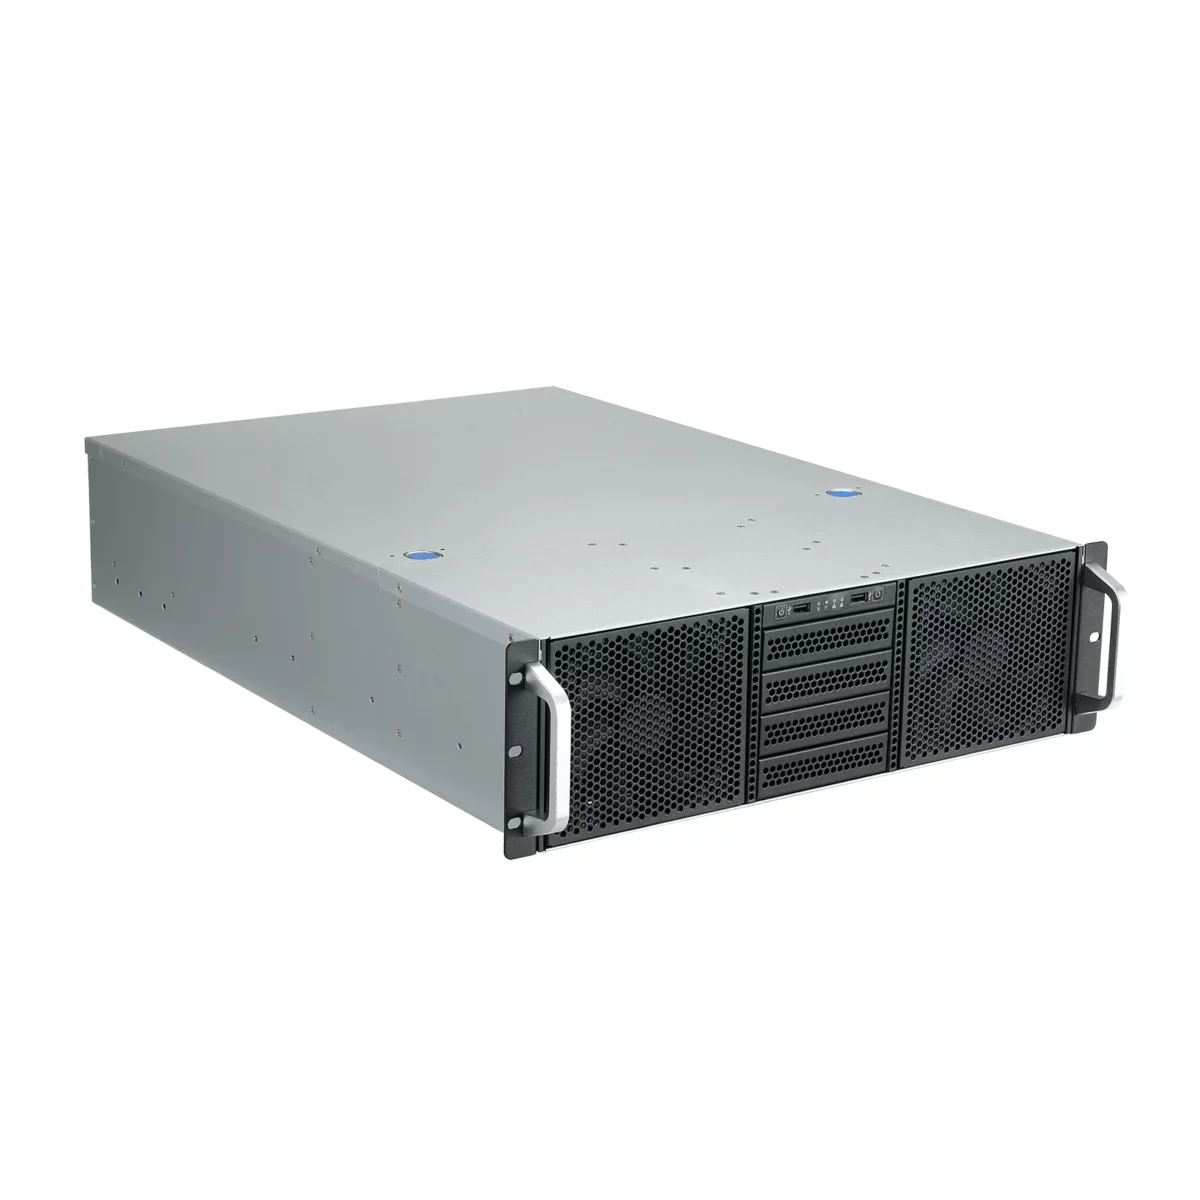 rackmount chassis OC3650-Y side view